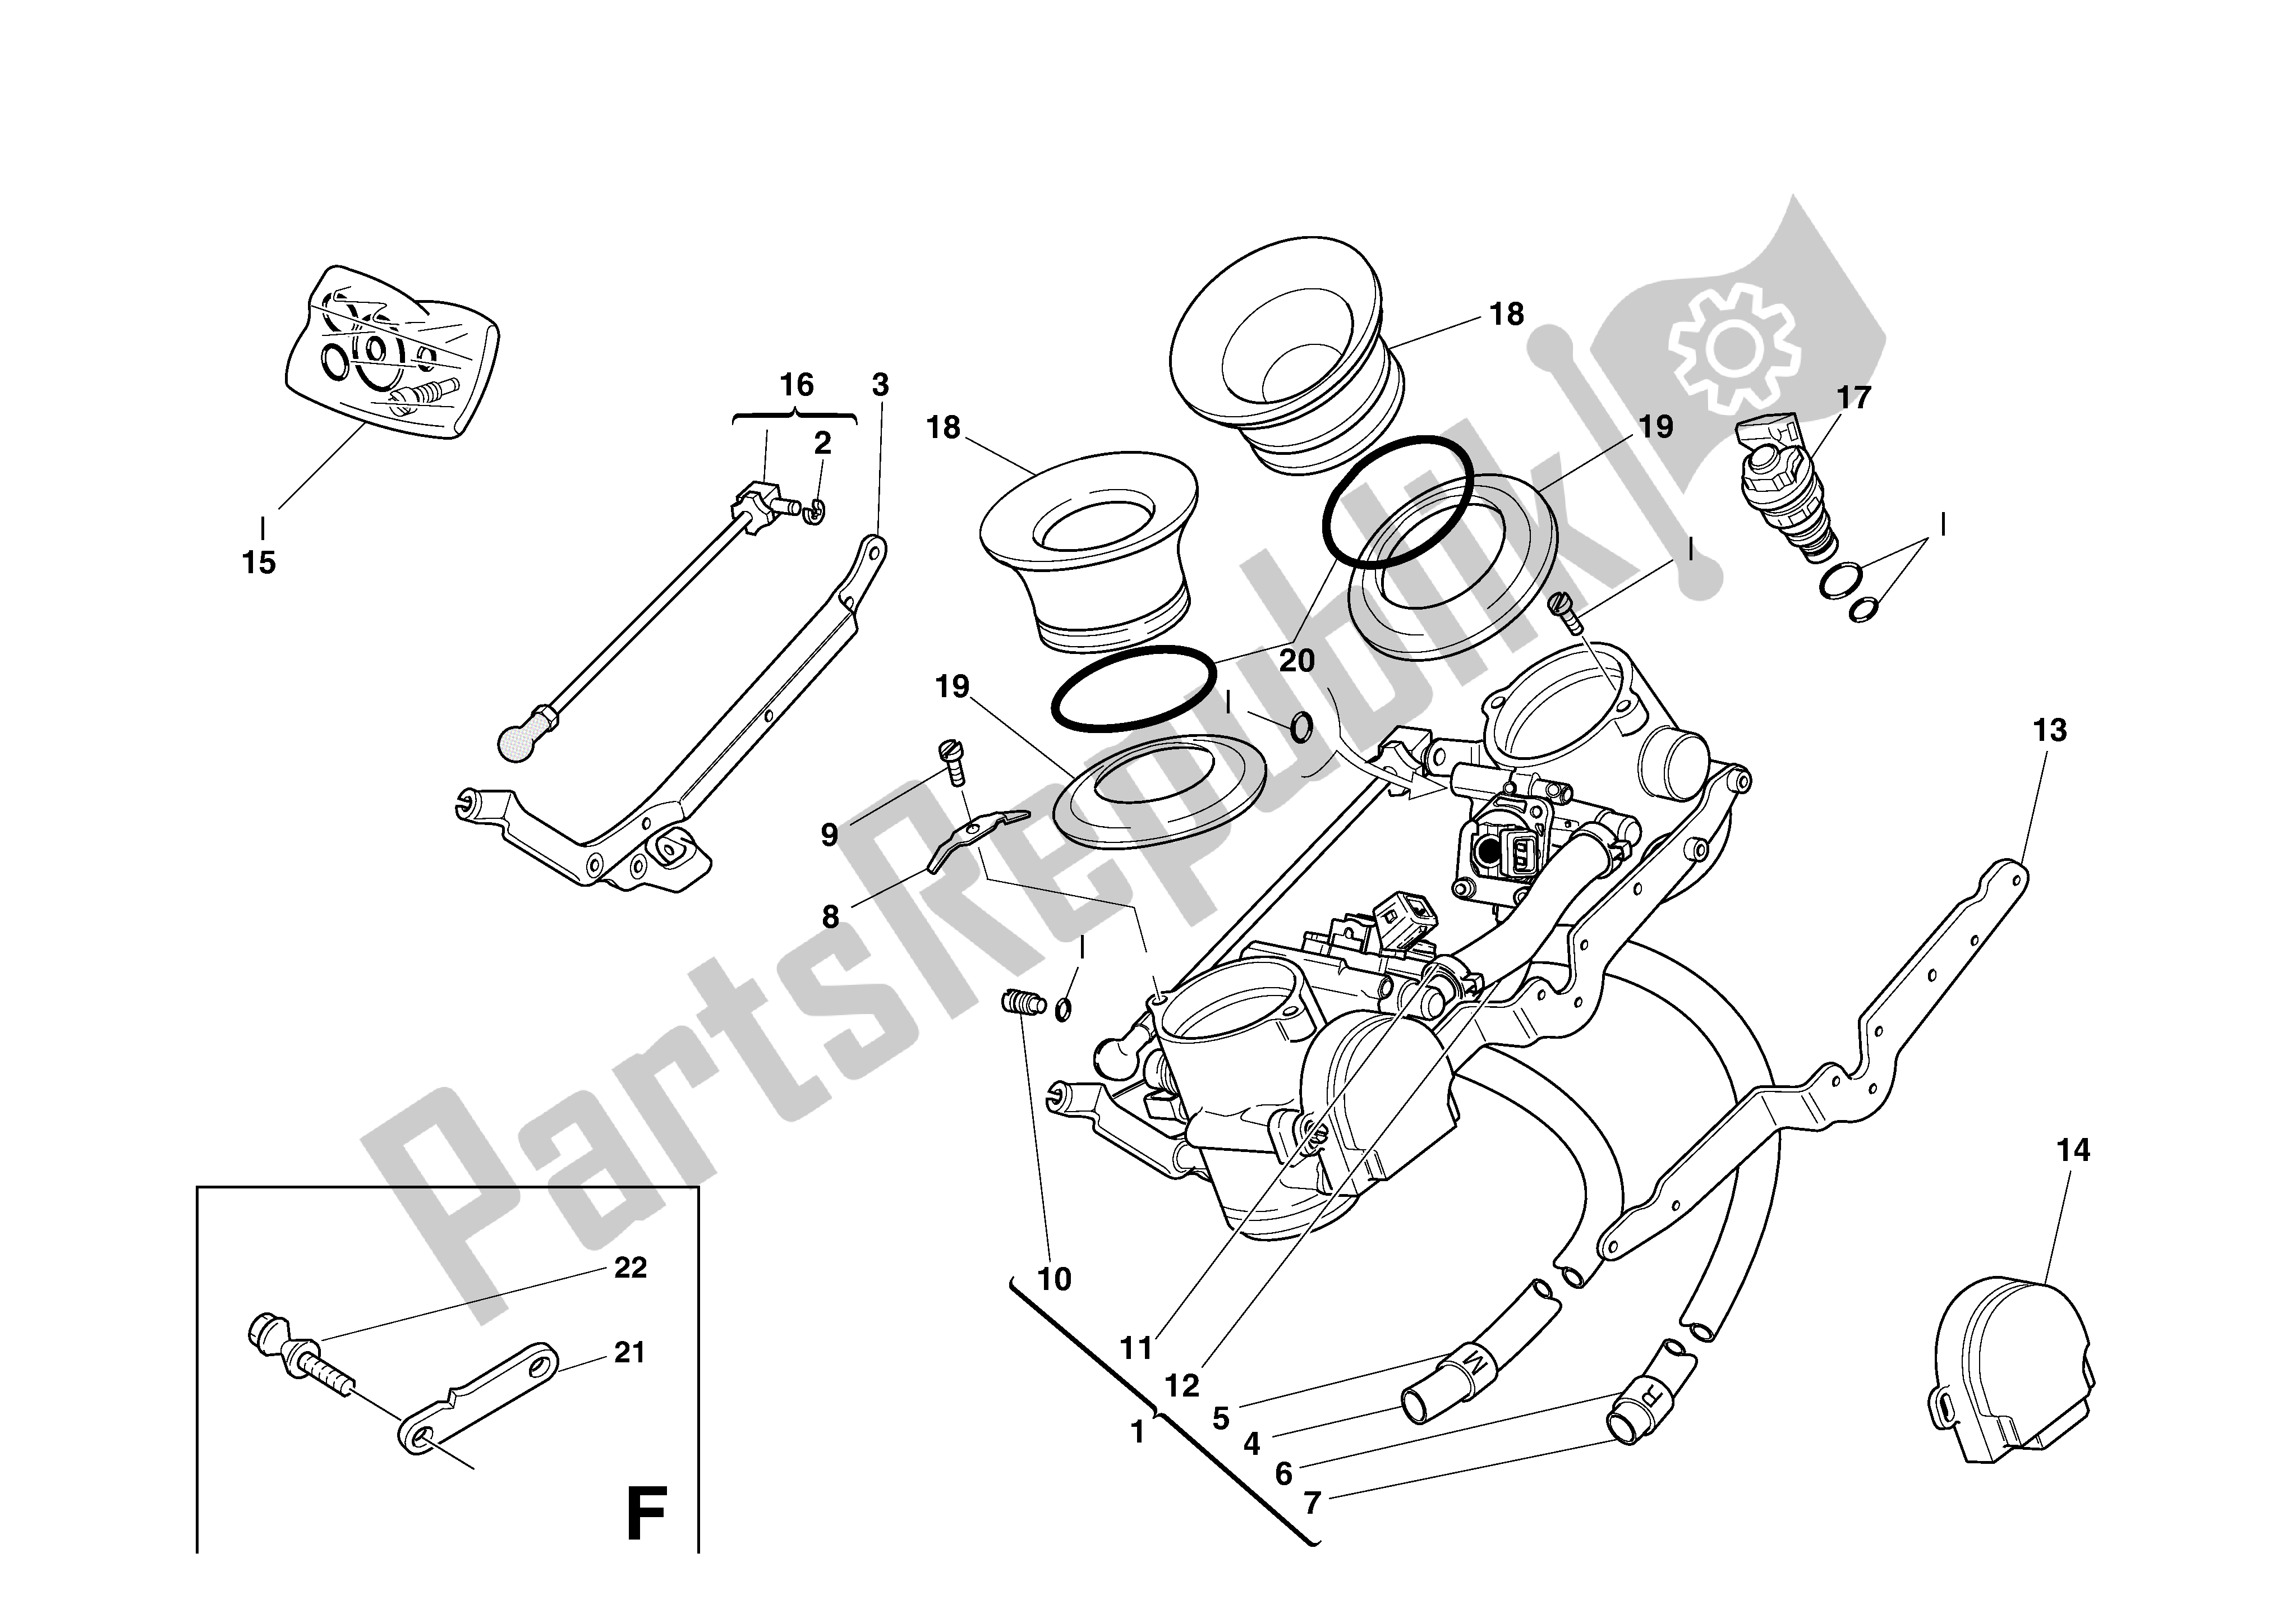 All parts for the Throttle Body of the Ducati Sporttouring 916 2001